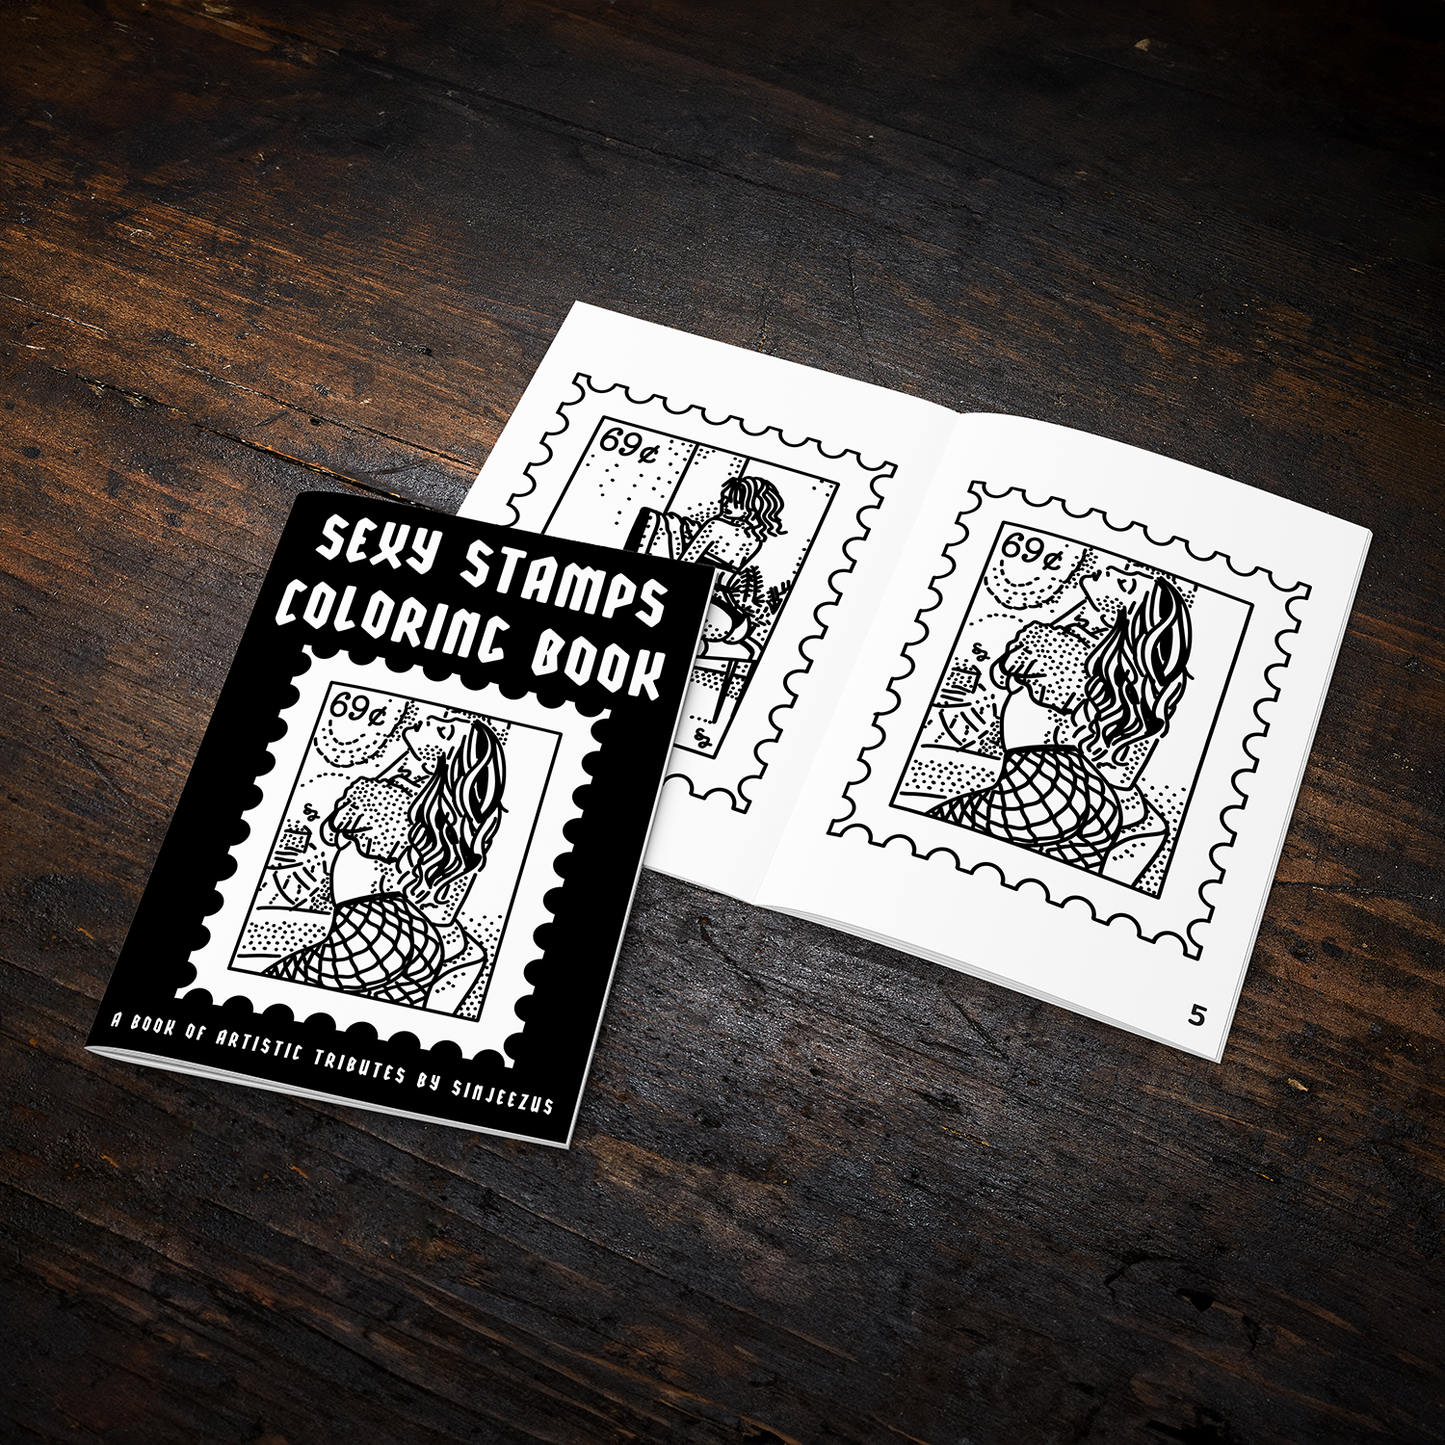 Sexy Stamps Coloring Book